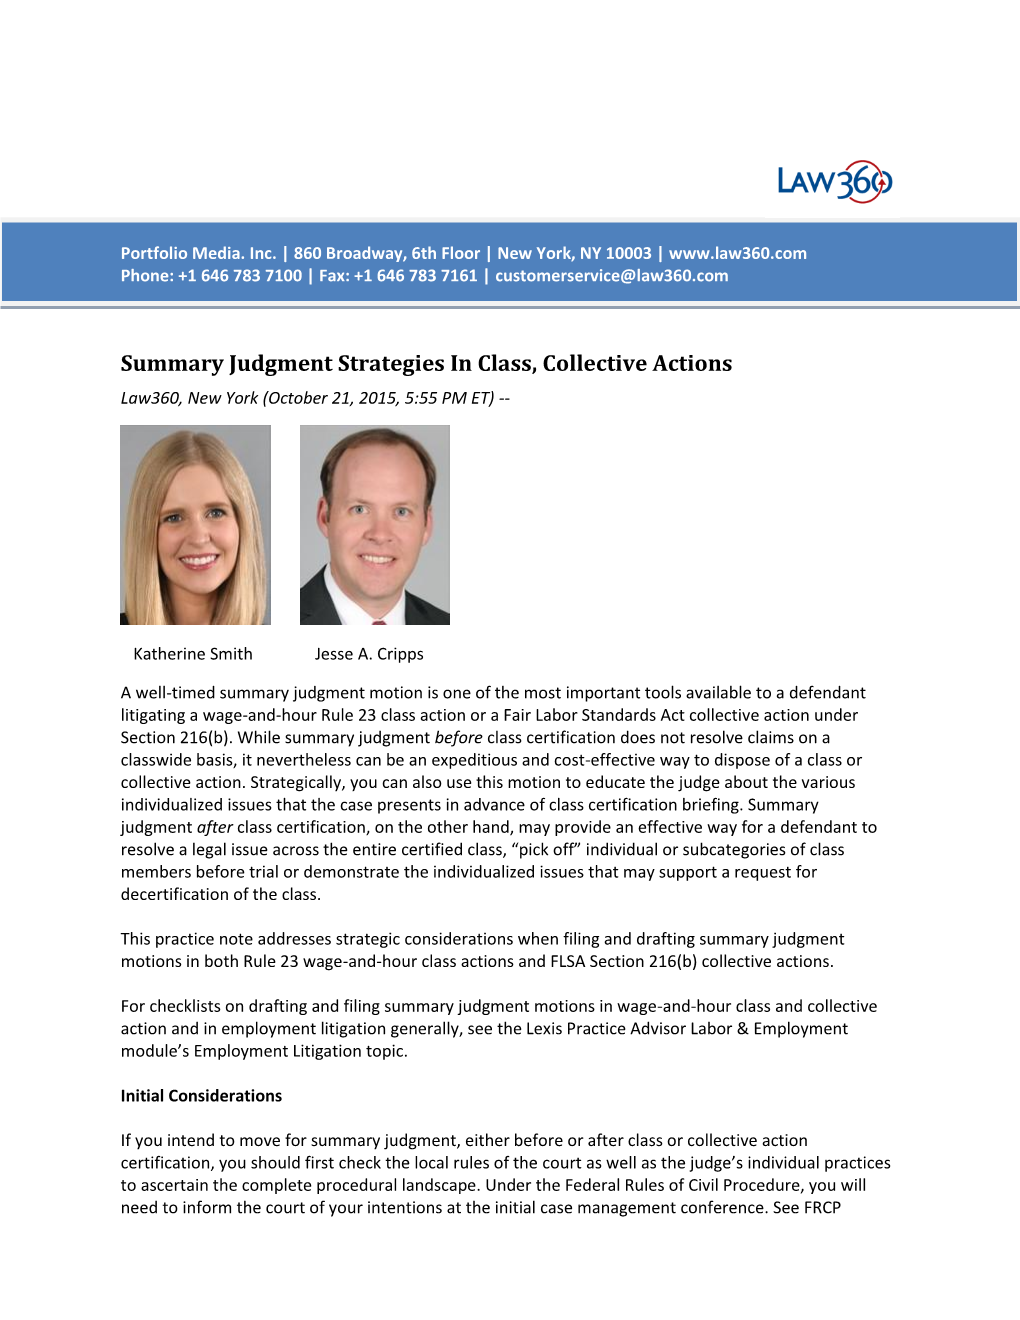 Summary Judgment Strategies in Class, Collective Actions Law360, New York (October 21, 2015, 5:55 PM ET)